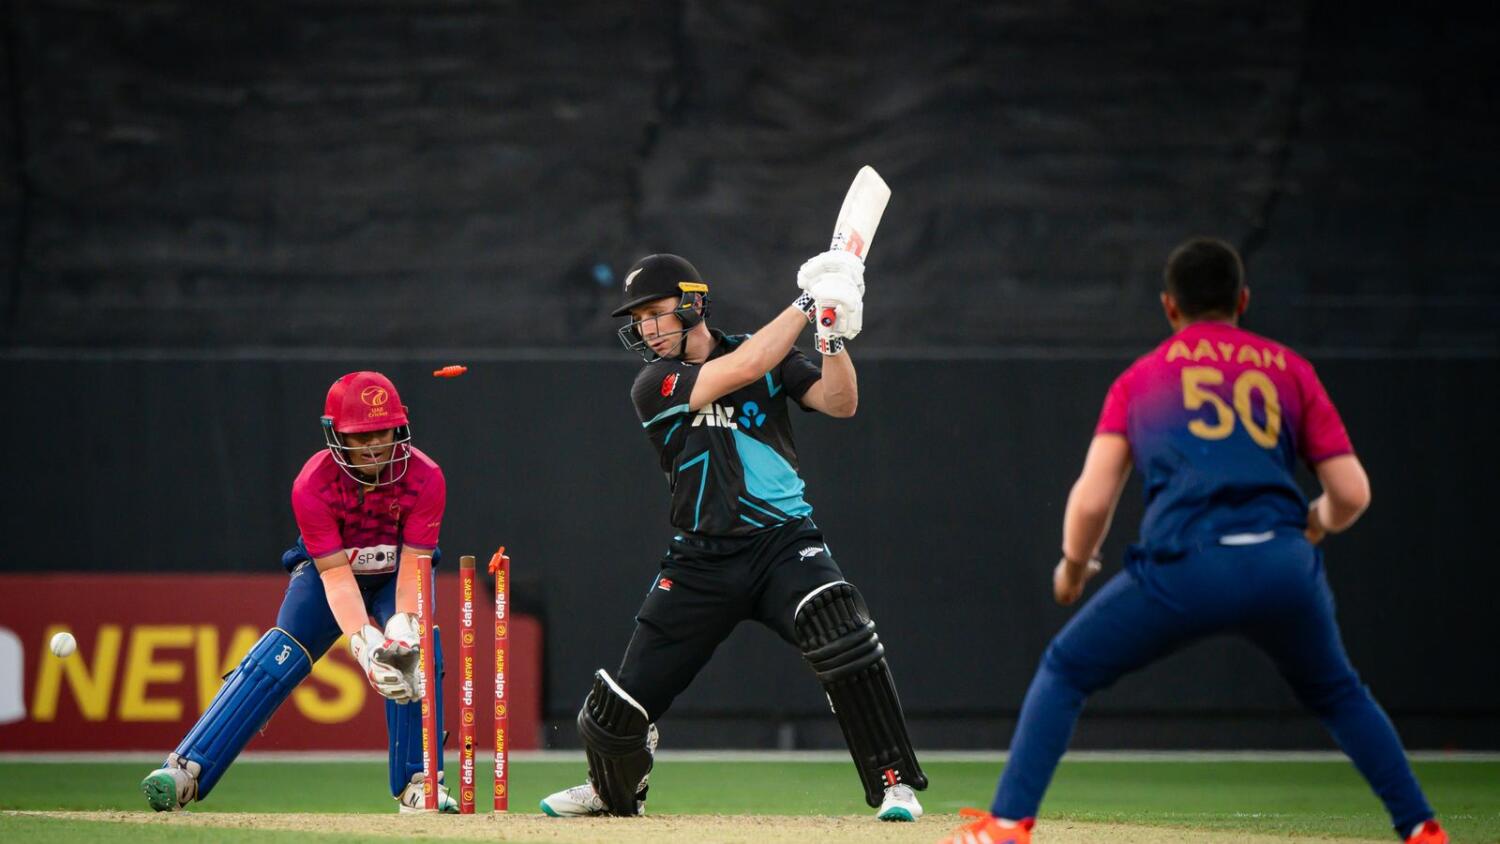 New Zealand's Dane Cleaver dismissed by UAE's Ayan Afzal Khan during the secon T20I match at Dubai International Stadium on Saturday.